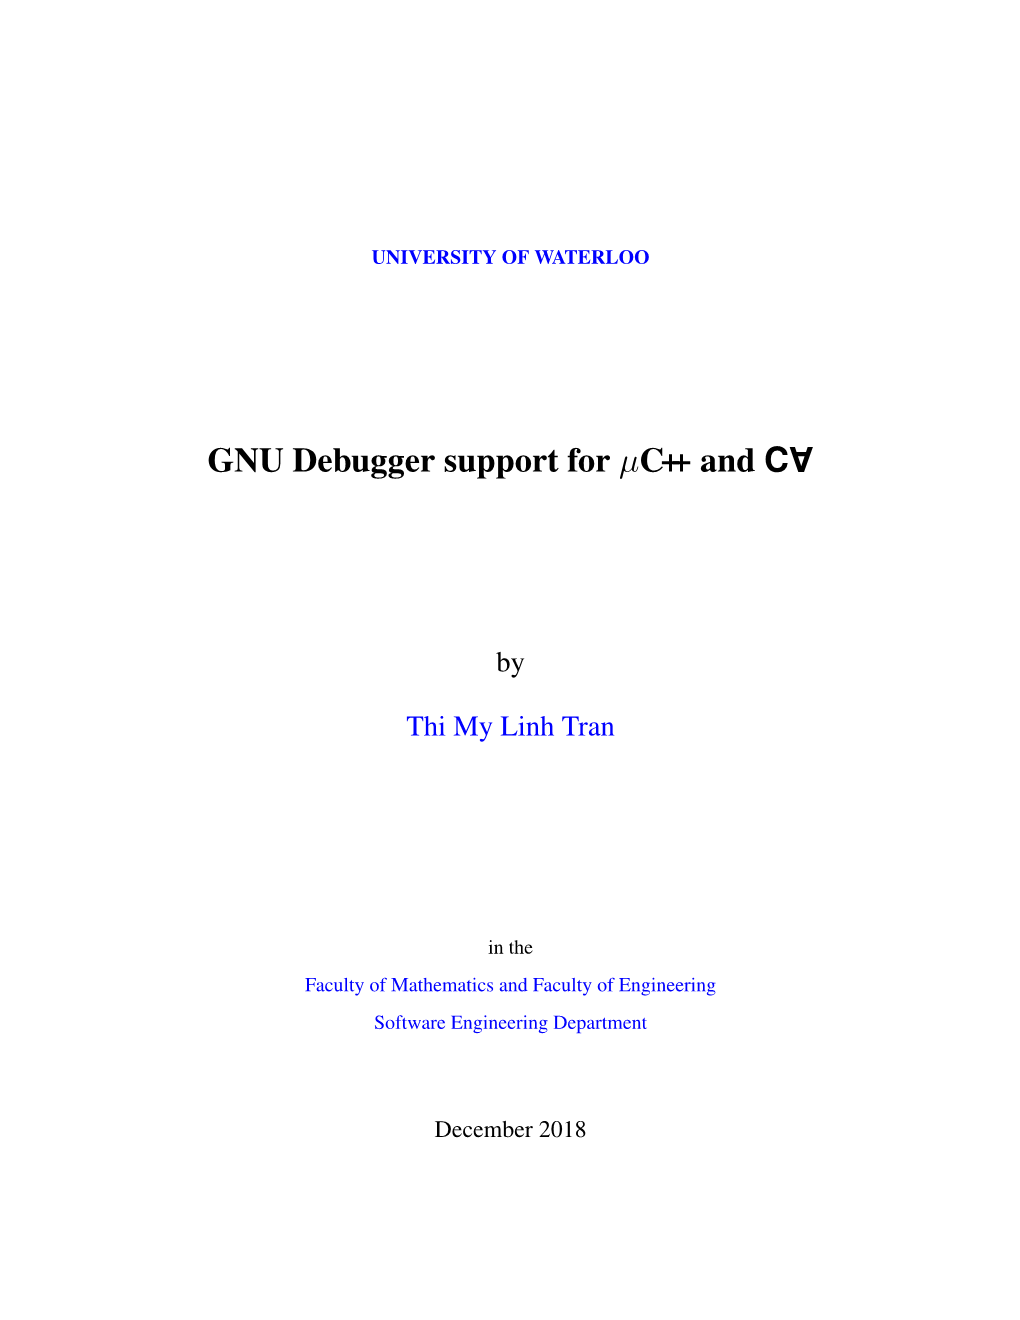 GNU Debugger Support for C++ and C180A